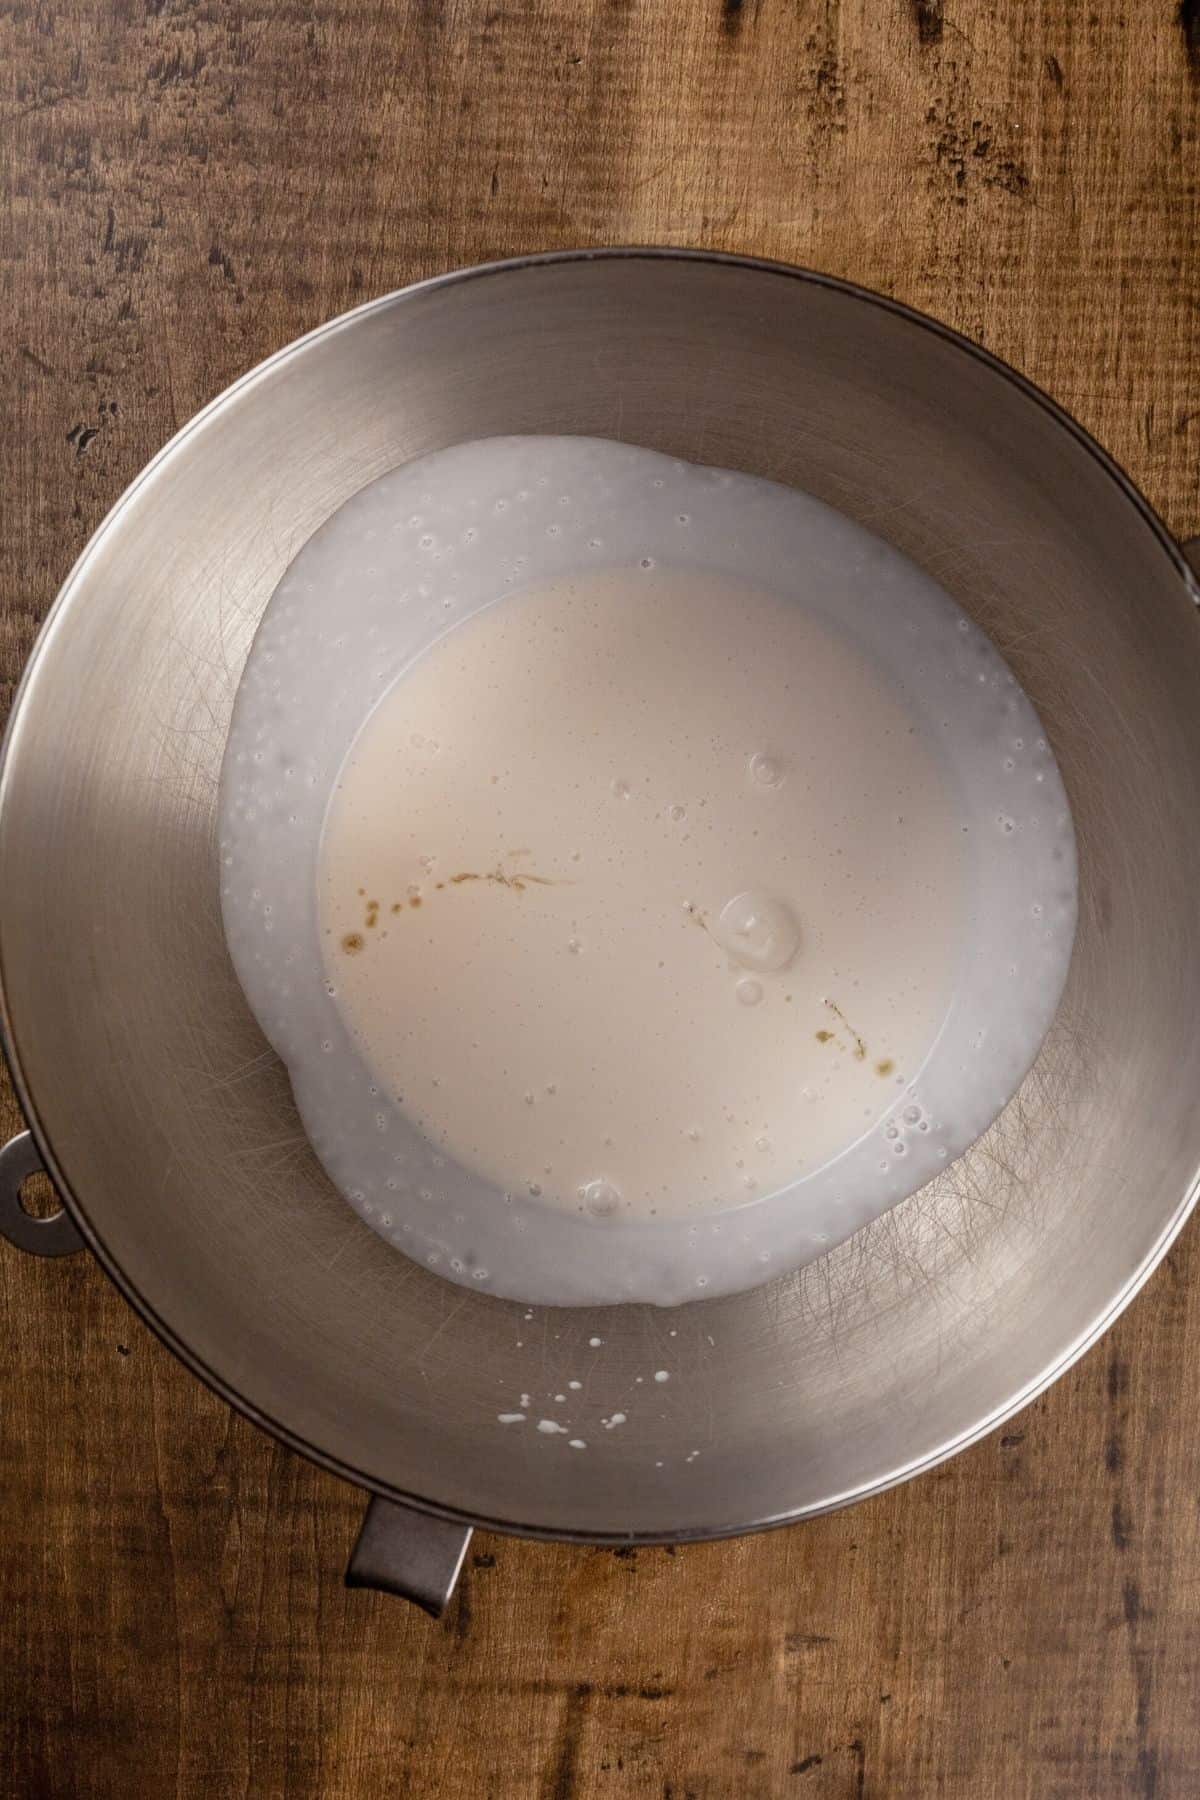 The wet ingredients in a silver mixing bowl on a wood tabletop.